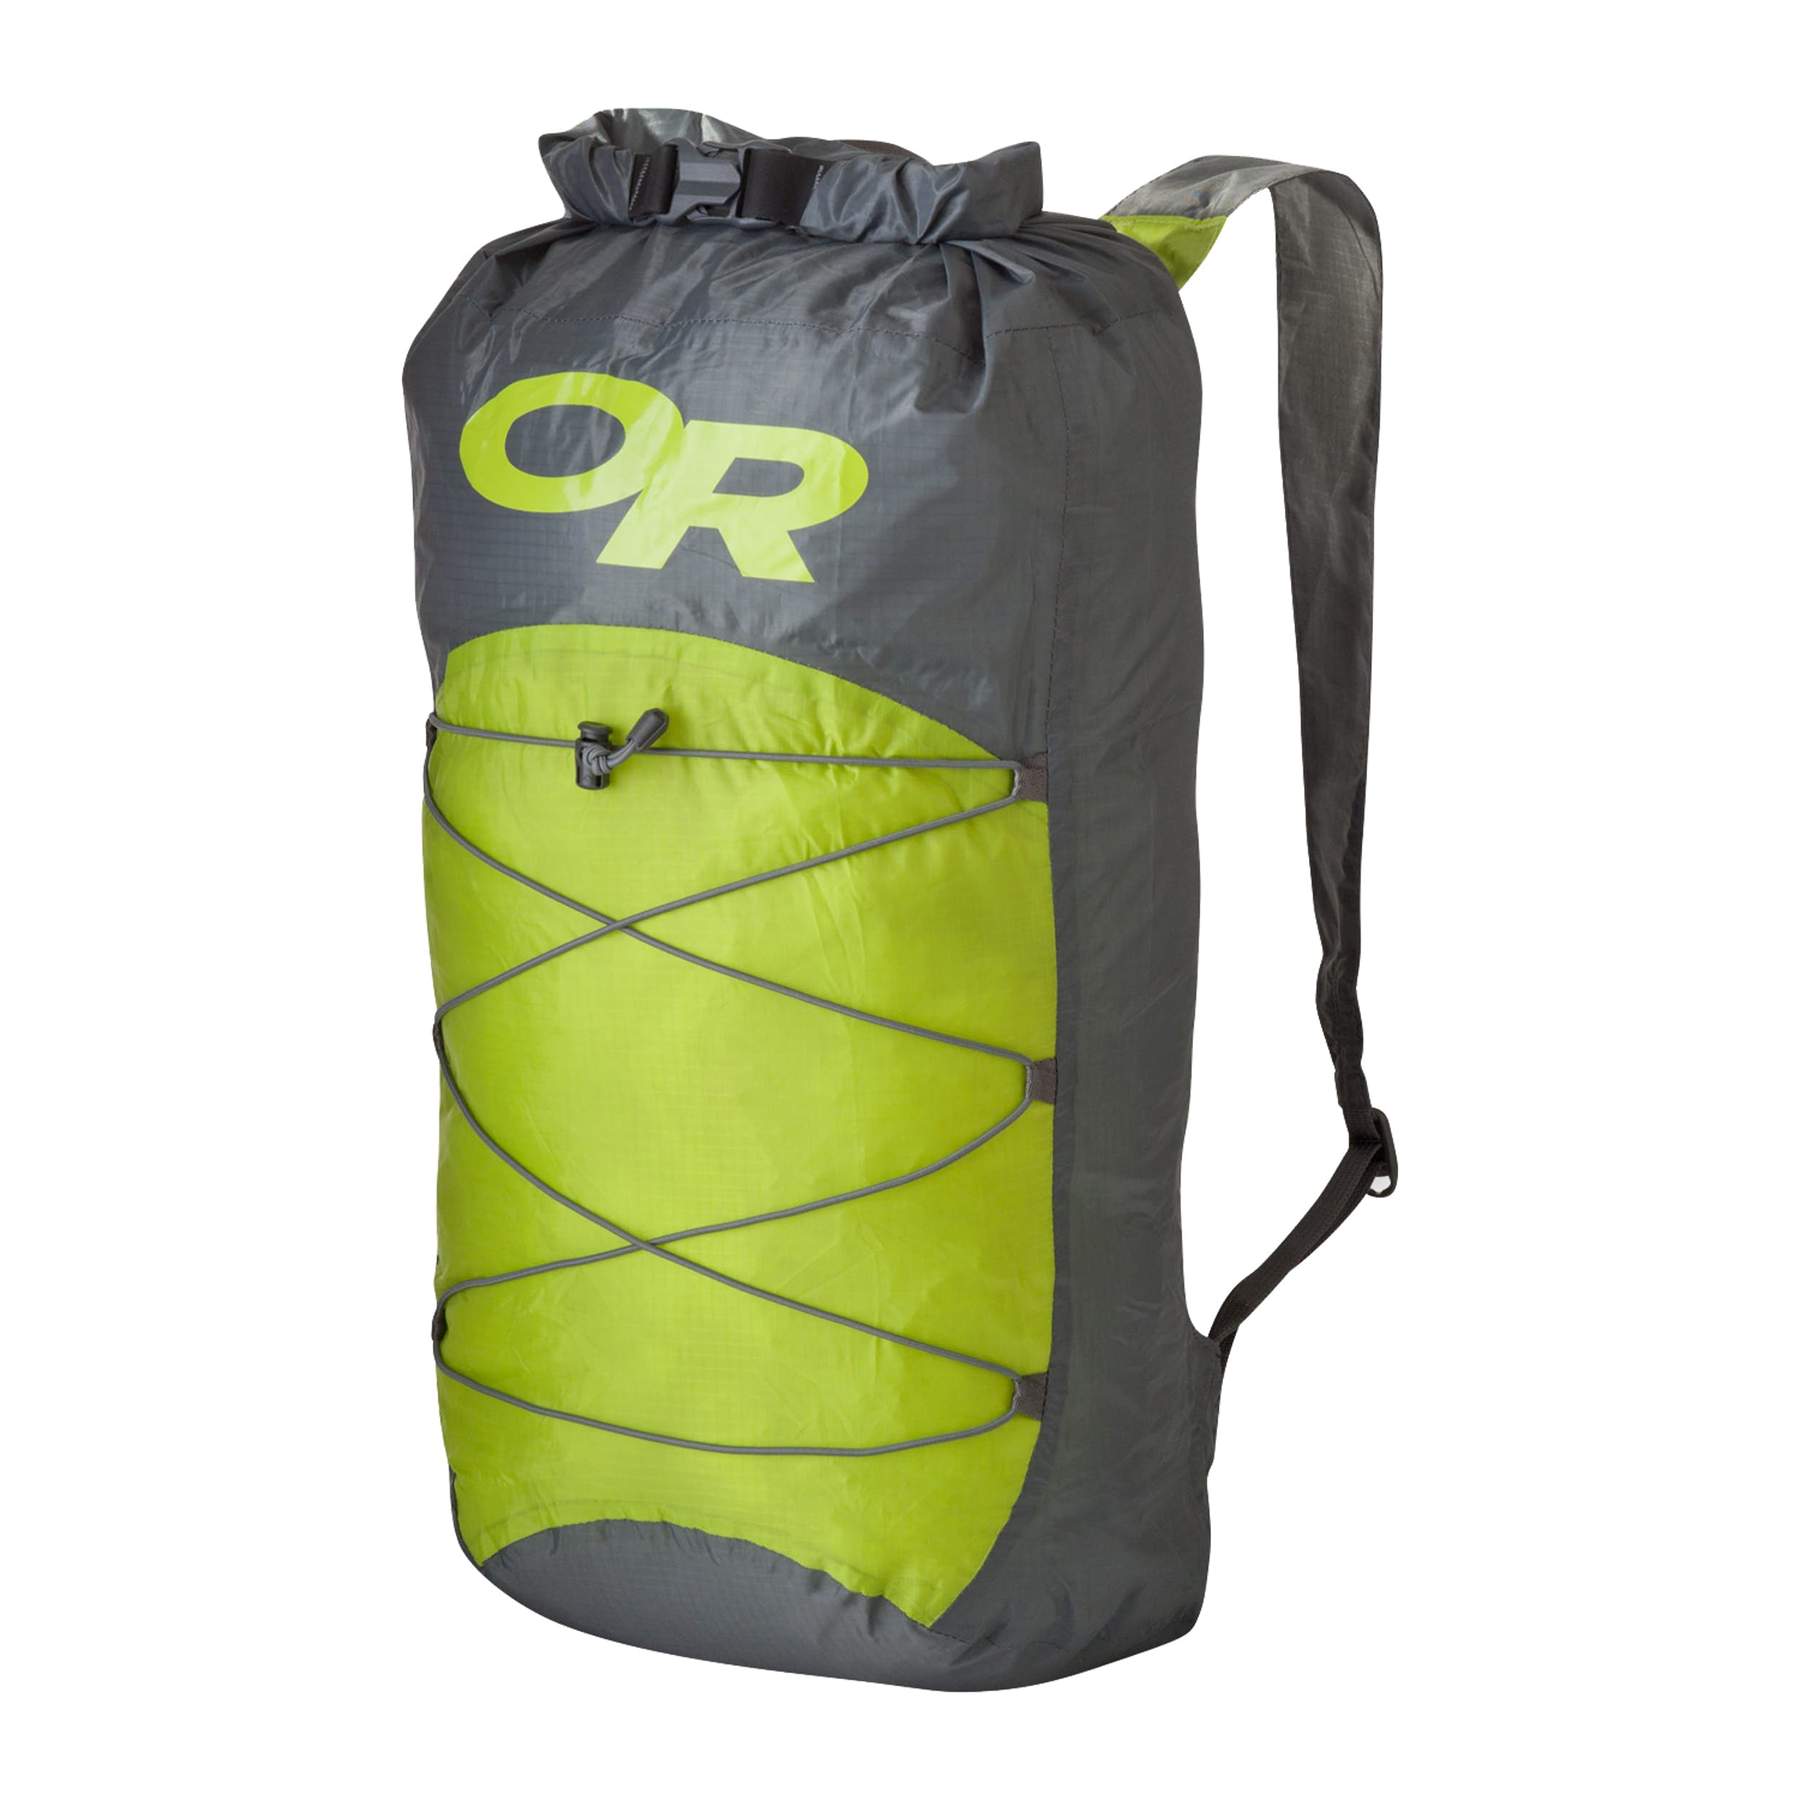 A weather-resistant day pack or dry pack for carrying extra camera equipment